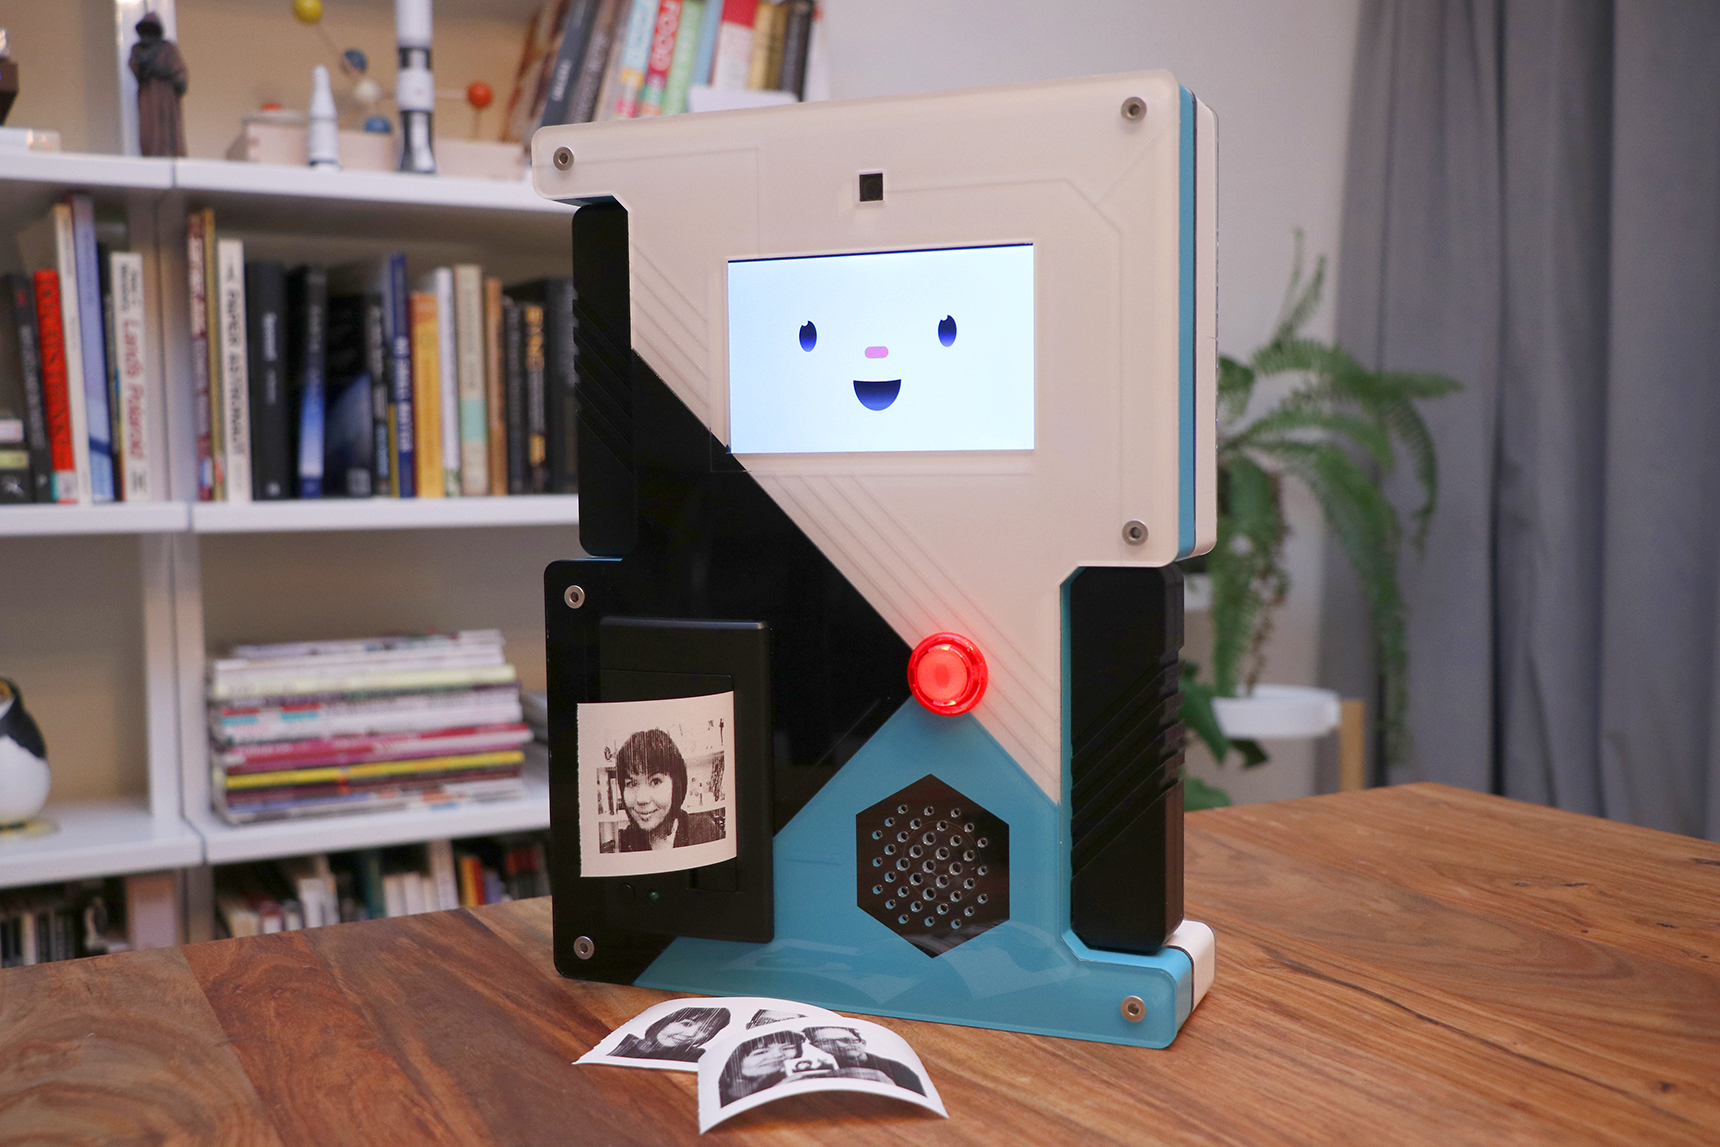 Meet SelfieBot: a Pi Camera with a Quirky Personality